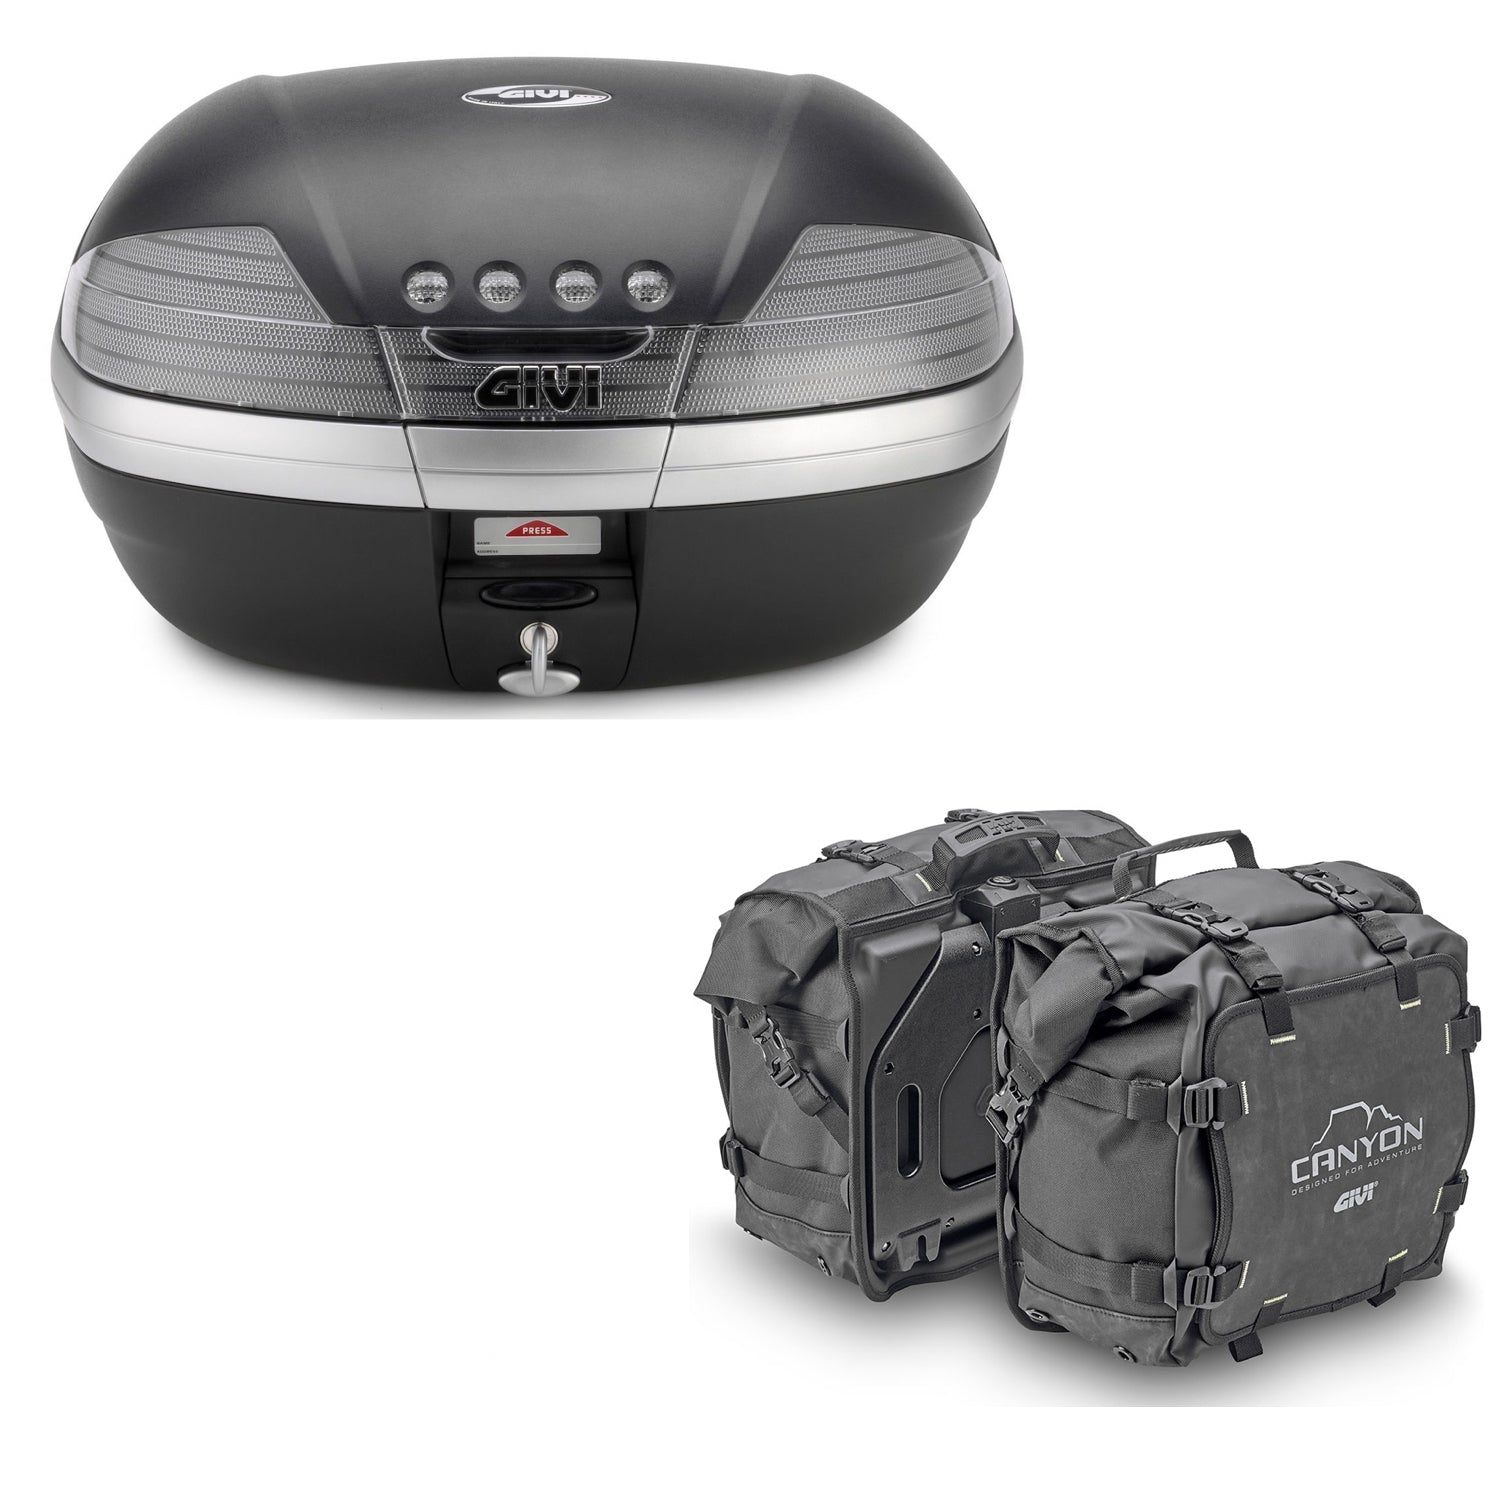 GIVI BAULETTO V46NT + VALIGIE LATERALI CANYON GRT720 COMPATIBILE CON YAMAHA TRACER 900 GT 18/20